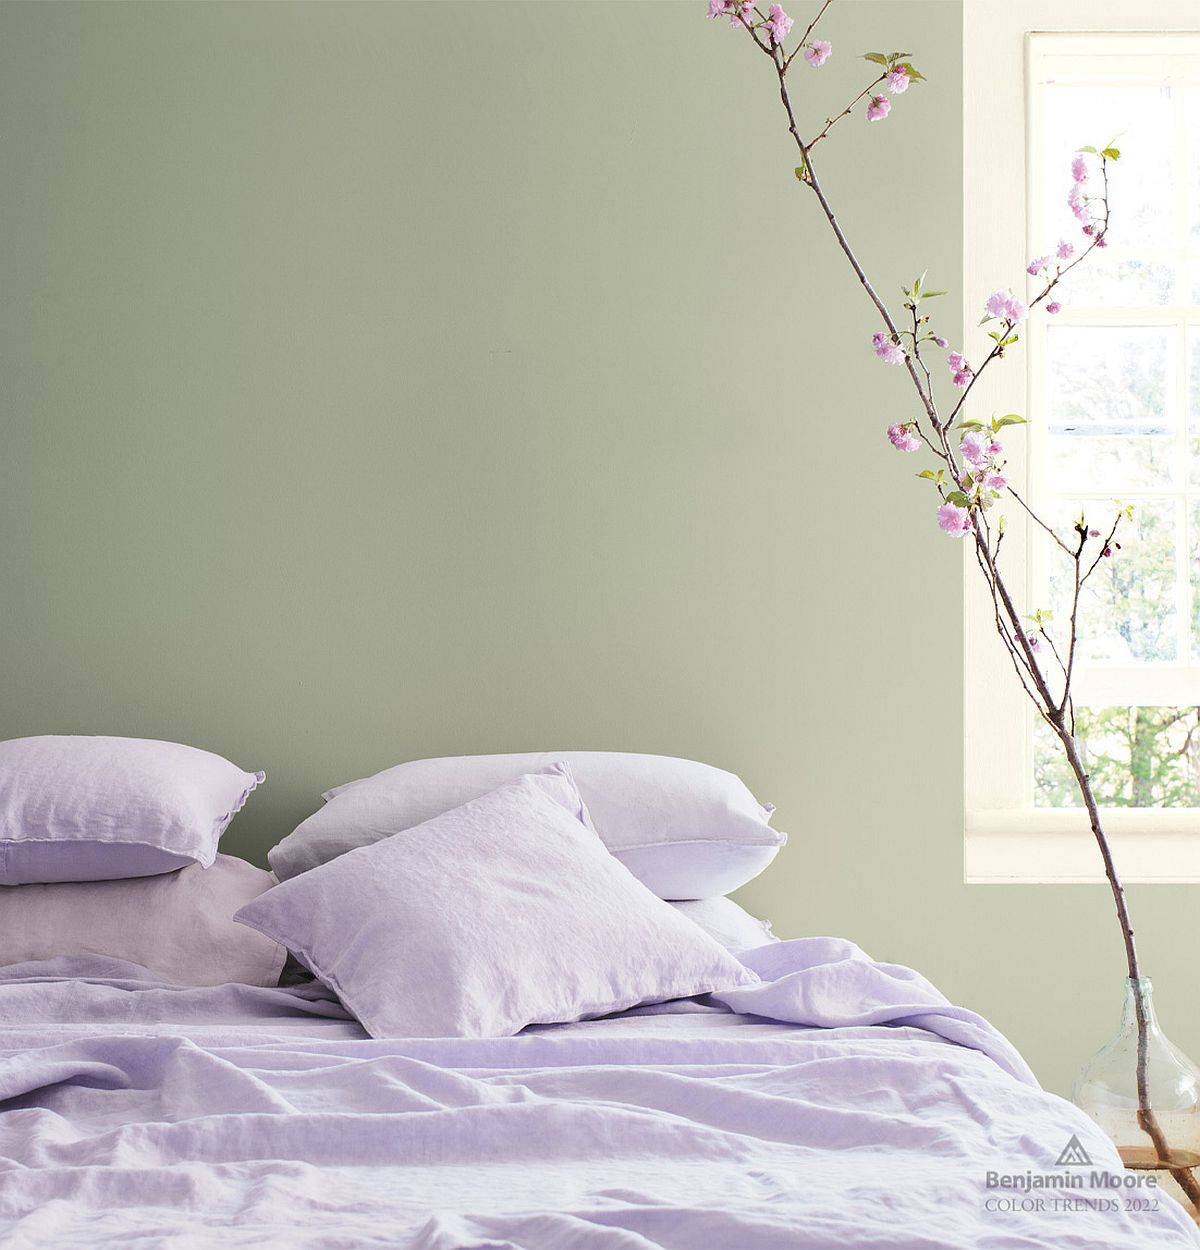 October Mist in the bedroom is a must try for design enthusiasts in the year ahead